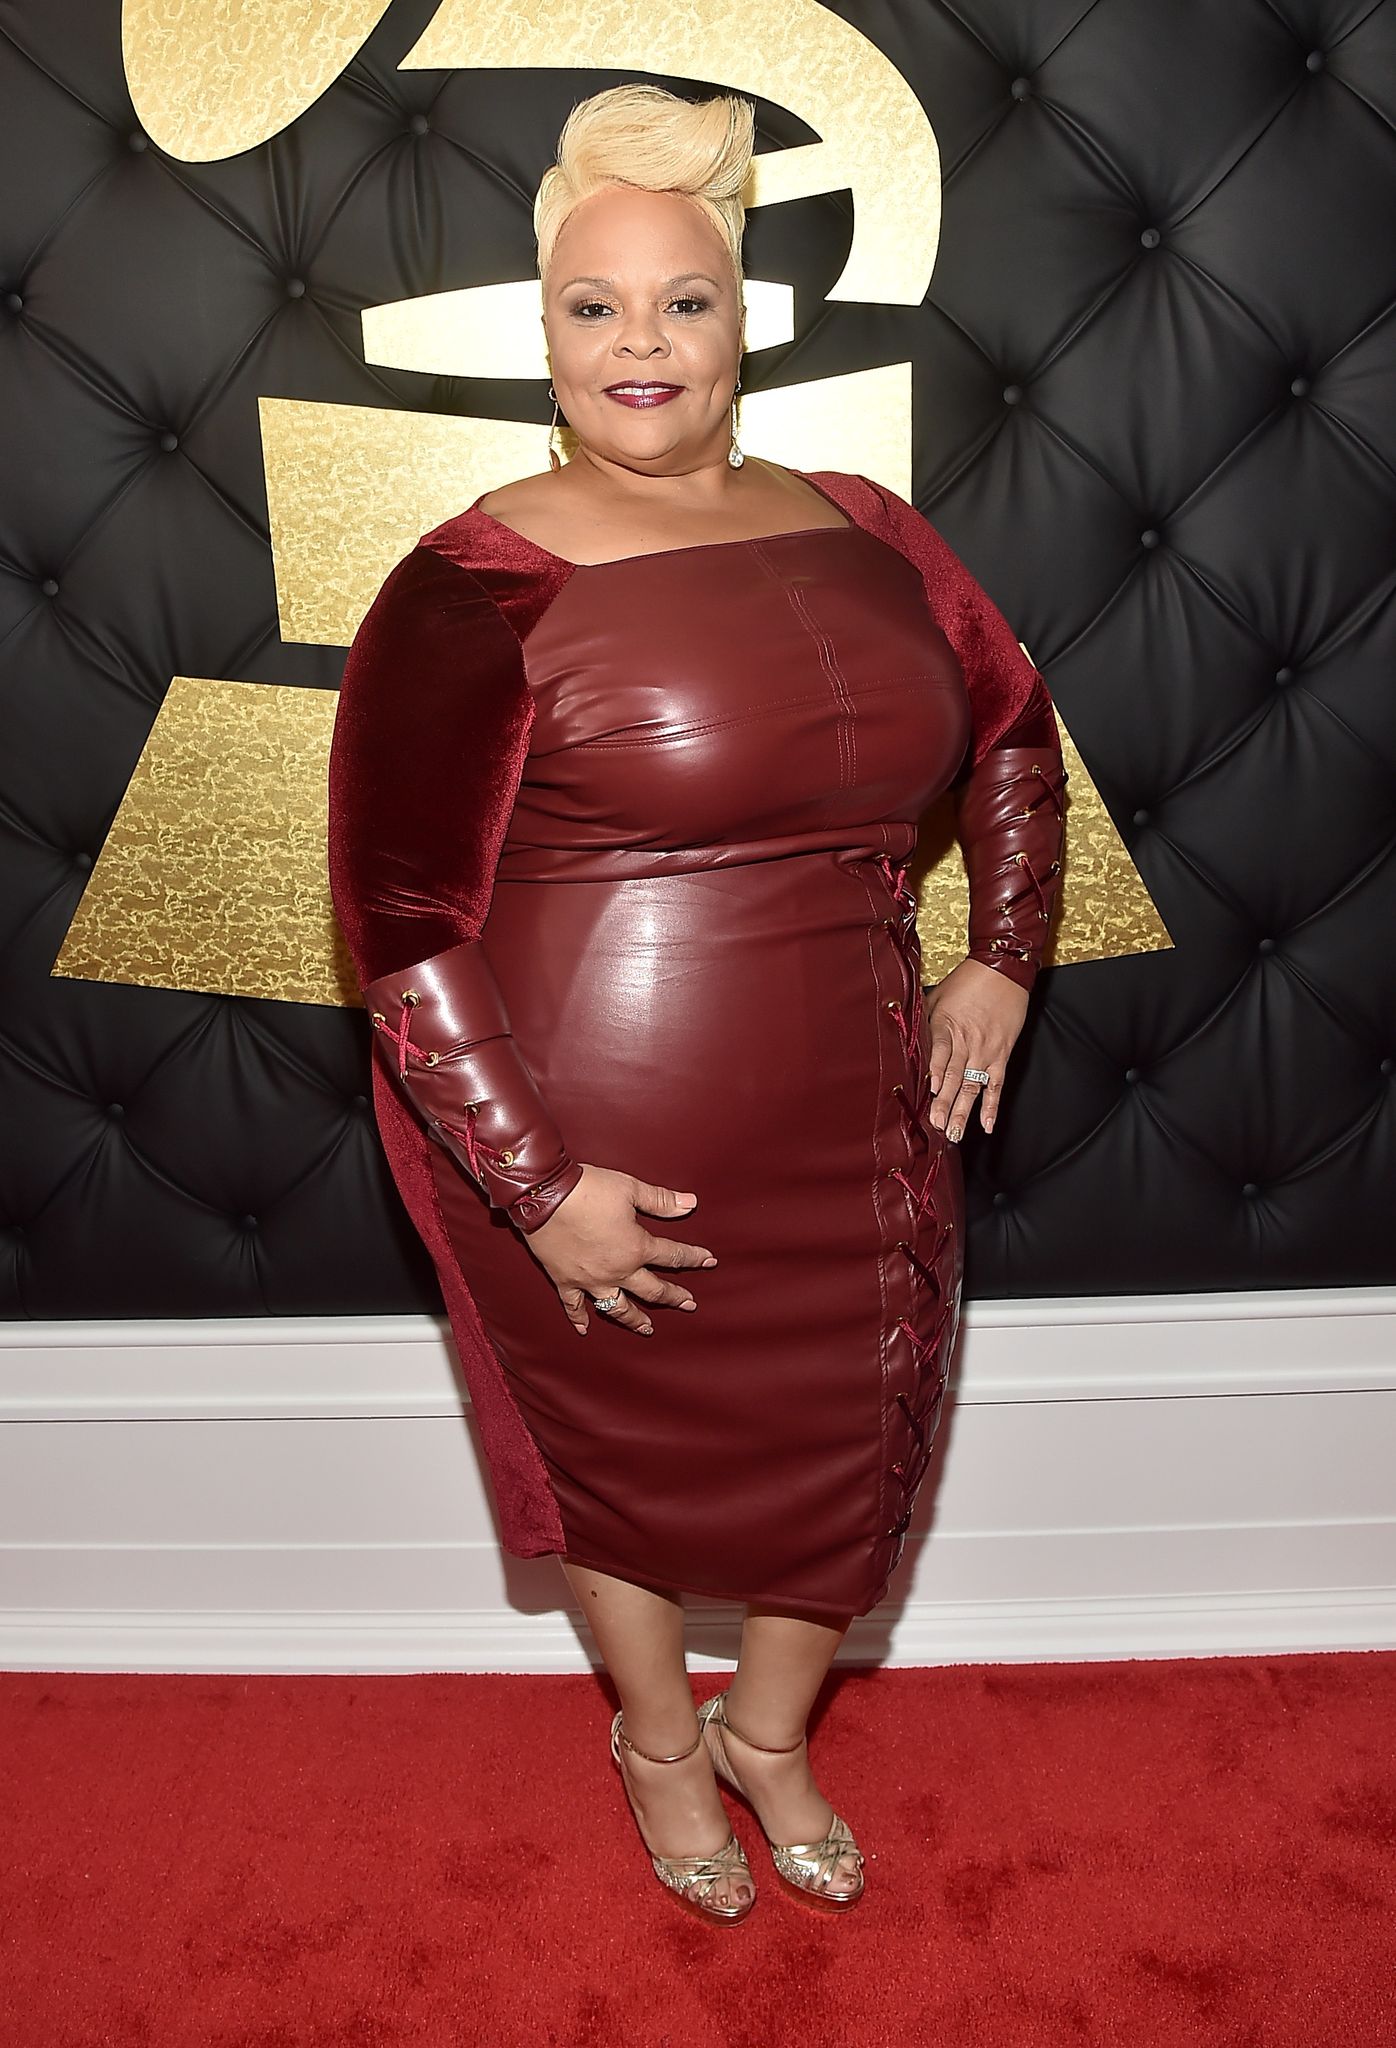 Tamela Mann attends the 59th Grammy Awards at Staples Center in Los Angeles, California on February 12, 2017. | Photo: Getty Images